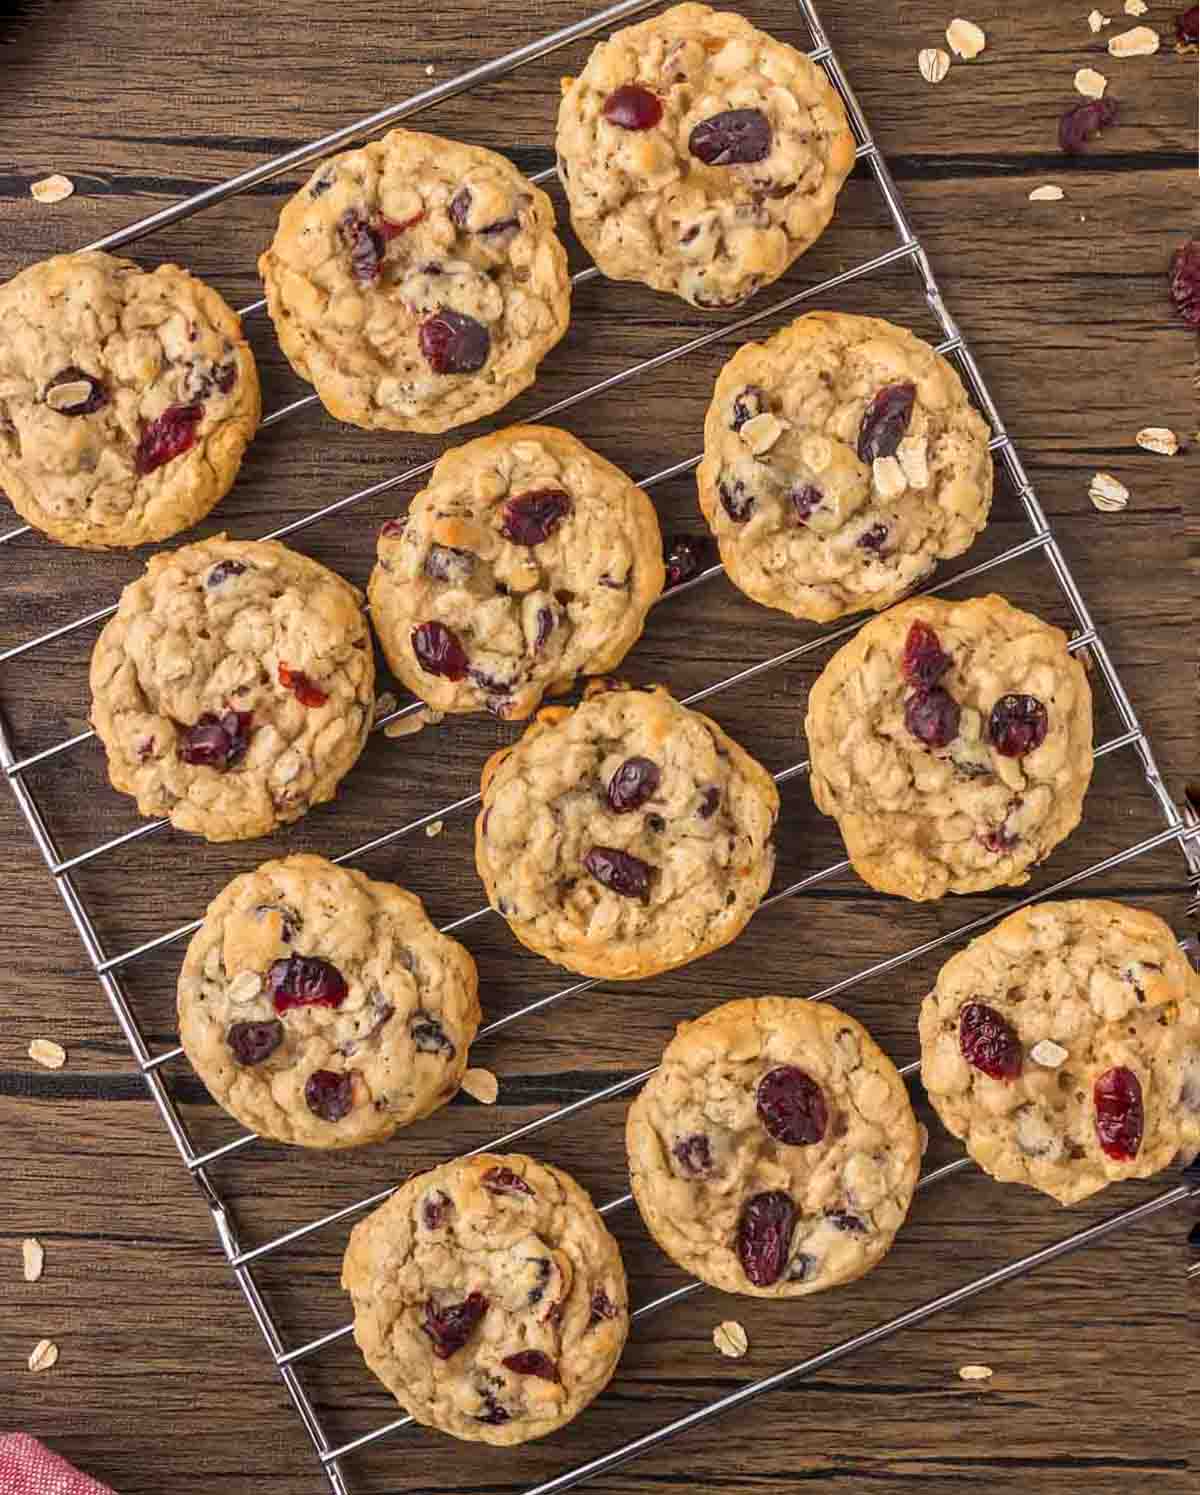 Cranberry oatmeal cookies on a wire rack.